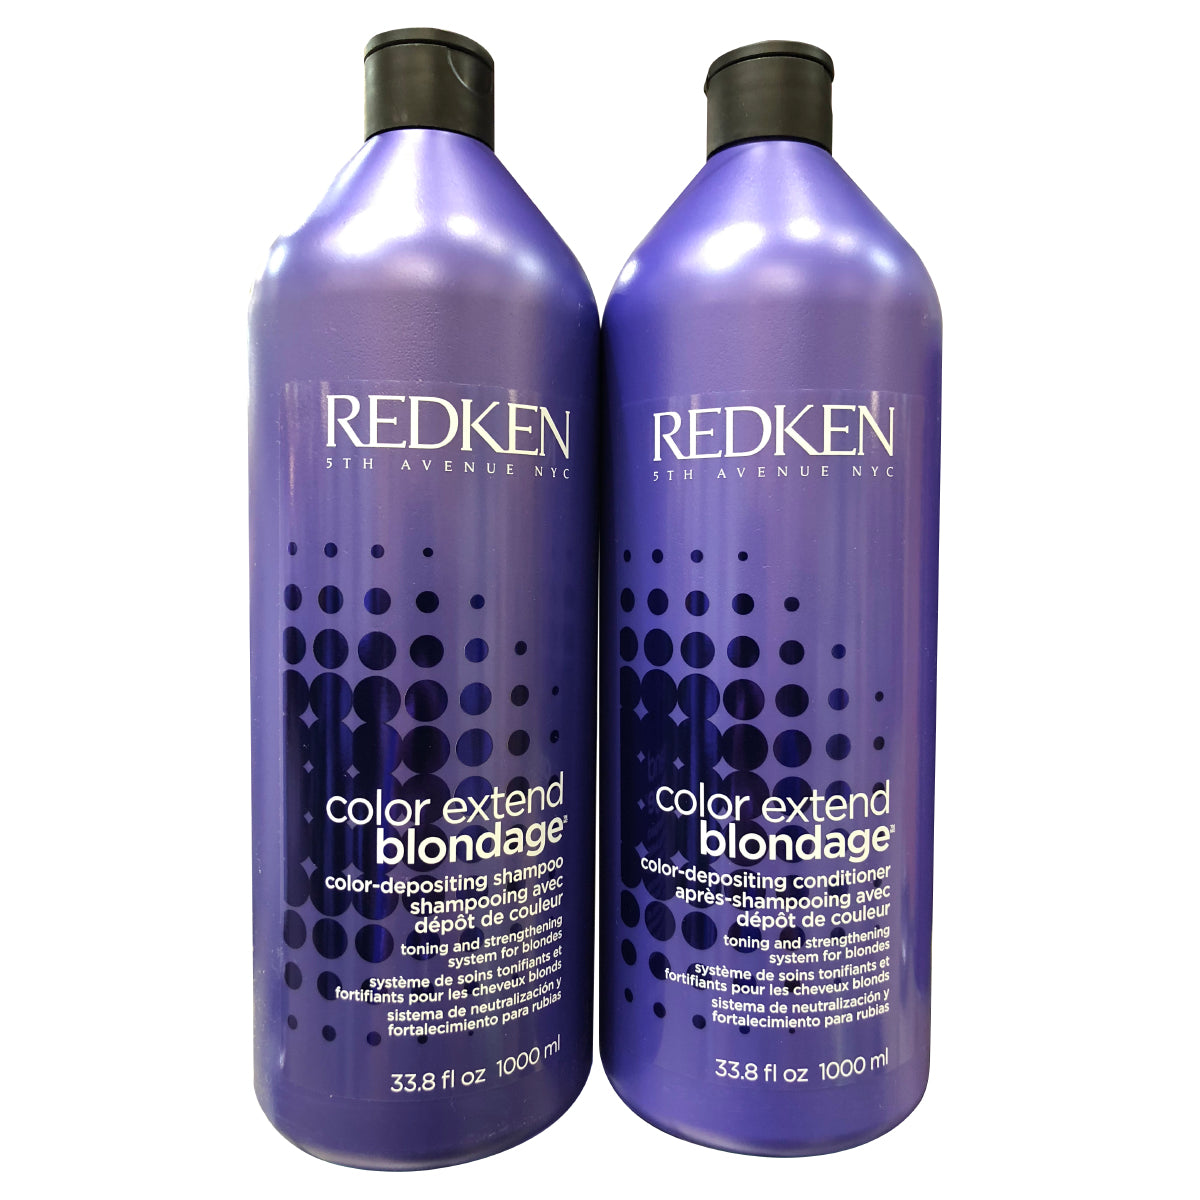 Redken Color Extend Blondage Shampoo and Conditioner Duo 1 Liter